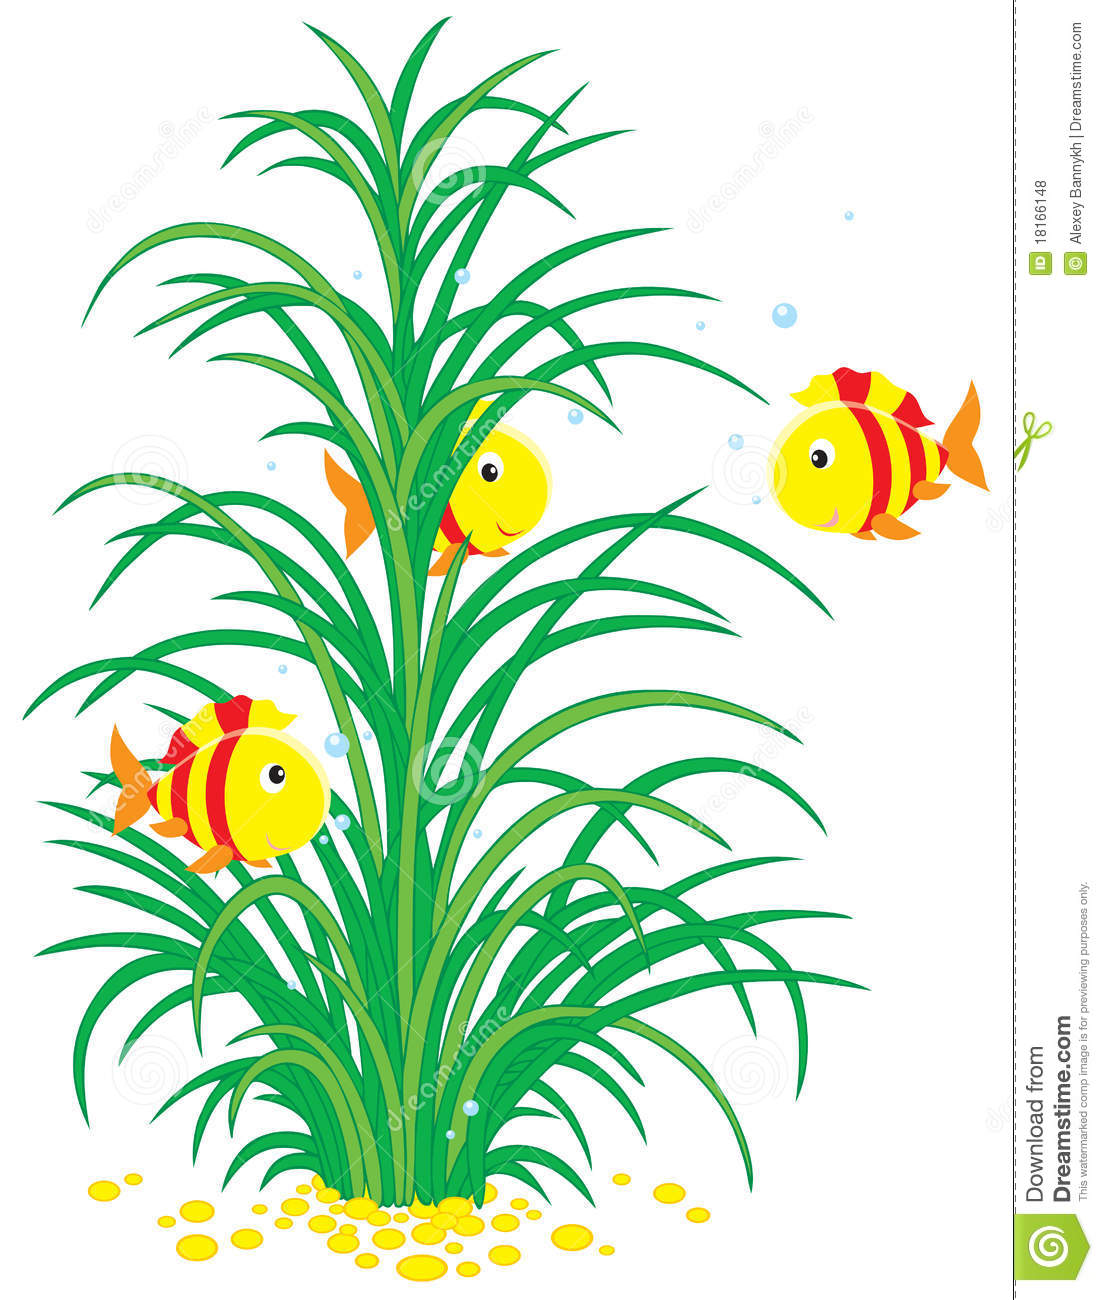 Art Of Colorful Striped Tropical Fishes Swimming Around Green Seaweed